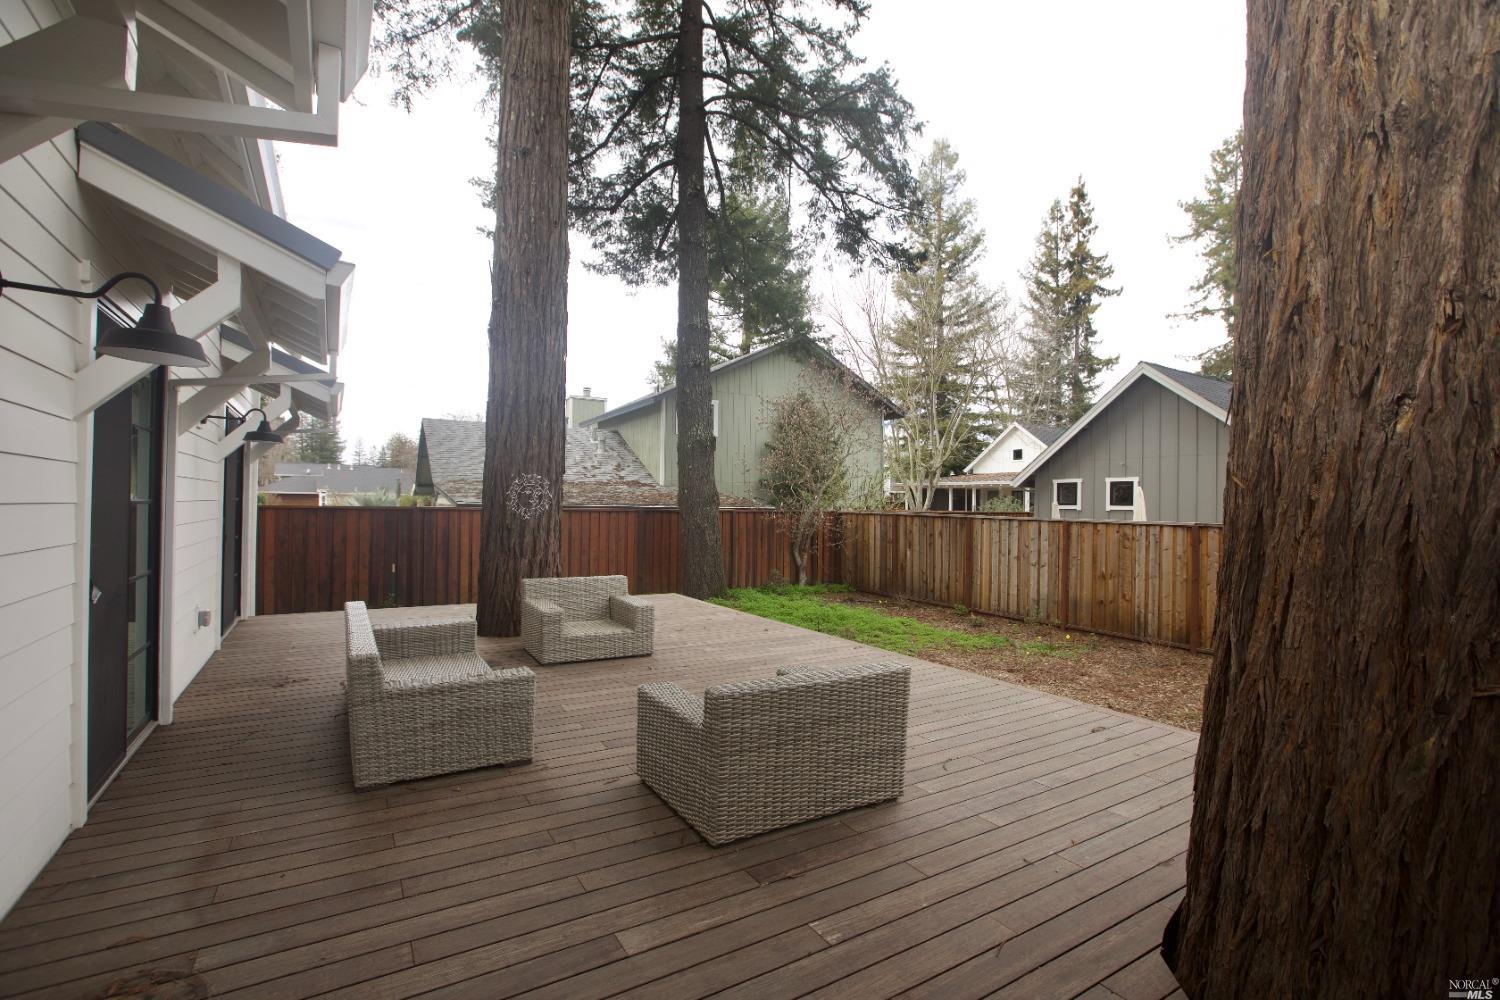 a backyard of a house with wooden floor and outdoor seating